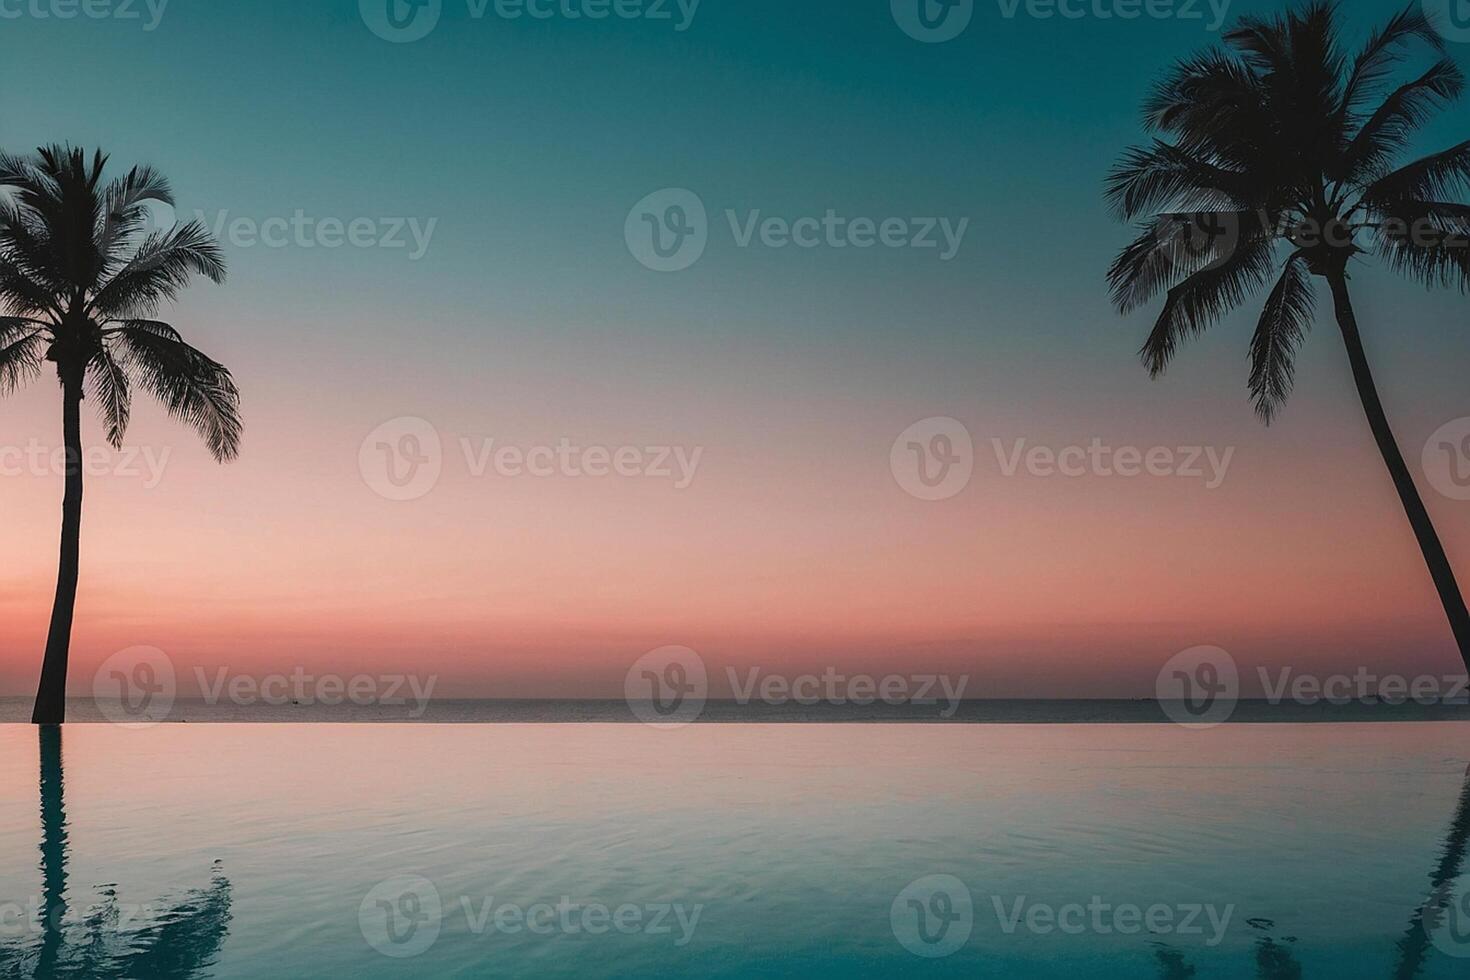 two palm trees stand in the middle of a pool at sunset photo